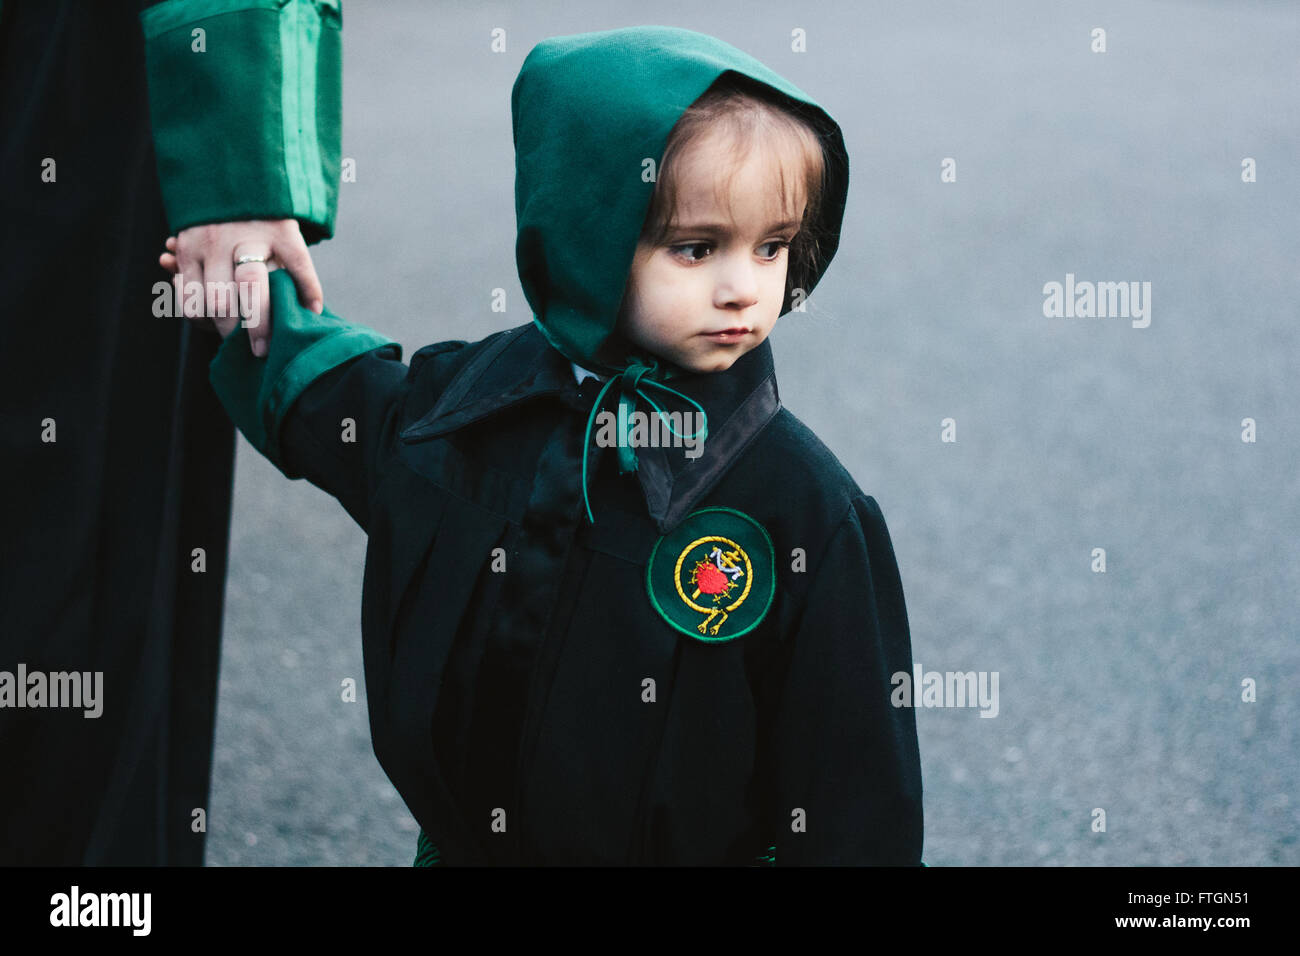 Little girl with a green hood and black tunic taking part in a procession during Holy Week, Spain. Stock Photo